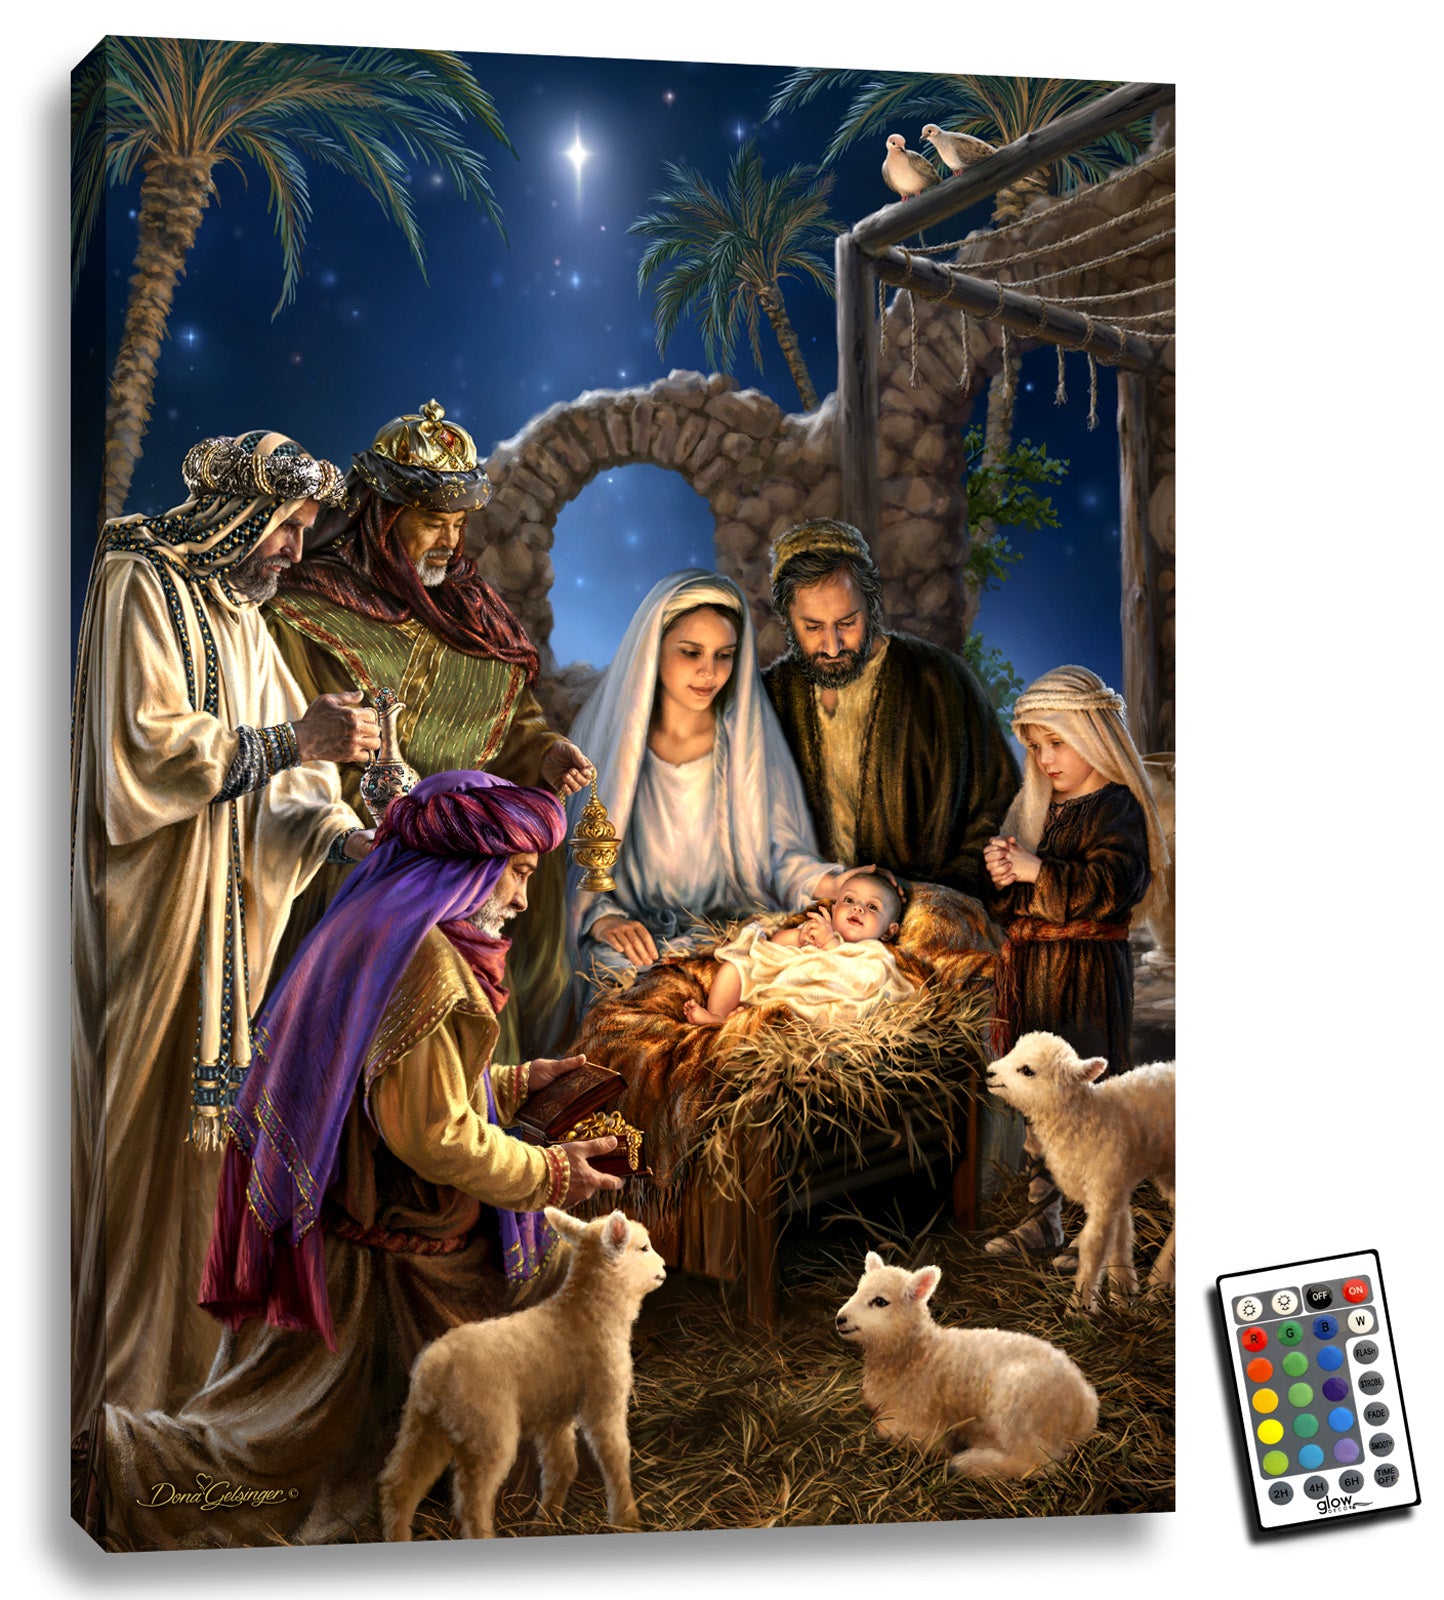  This beautiful piece captures the essence of the holy night when Jesus was born, with Mary and Joseph kneeling by his side, gazing upon their newborn child with awe and wonder. The wise men stand nearby, bearing their precious gifts, while a young boy and two lambs watch in amazement.